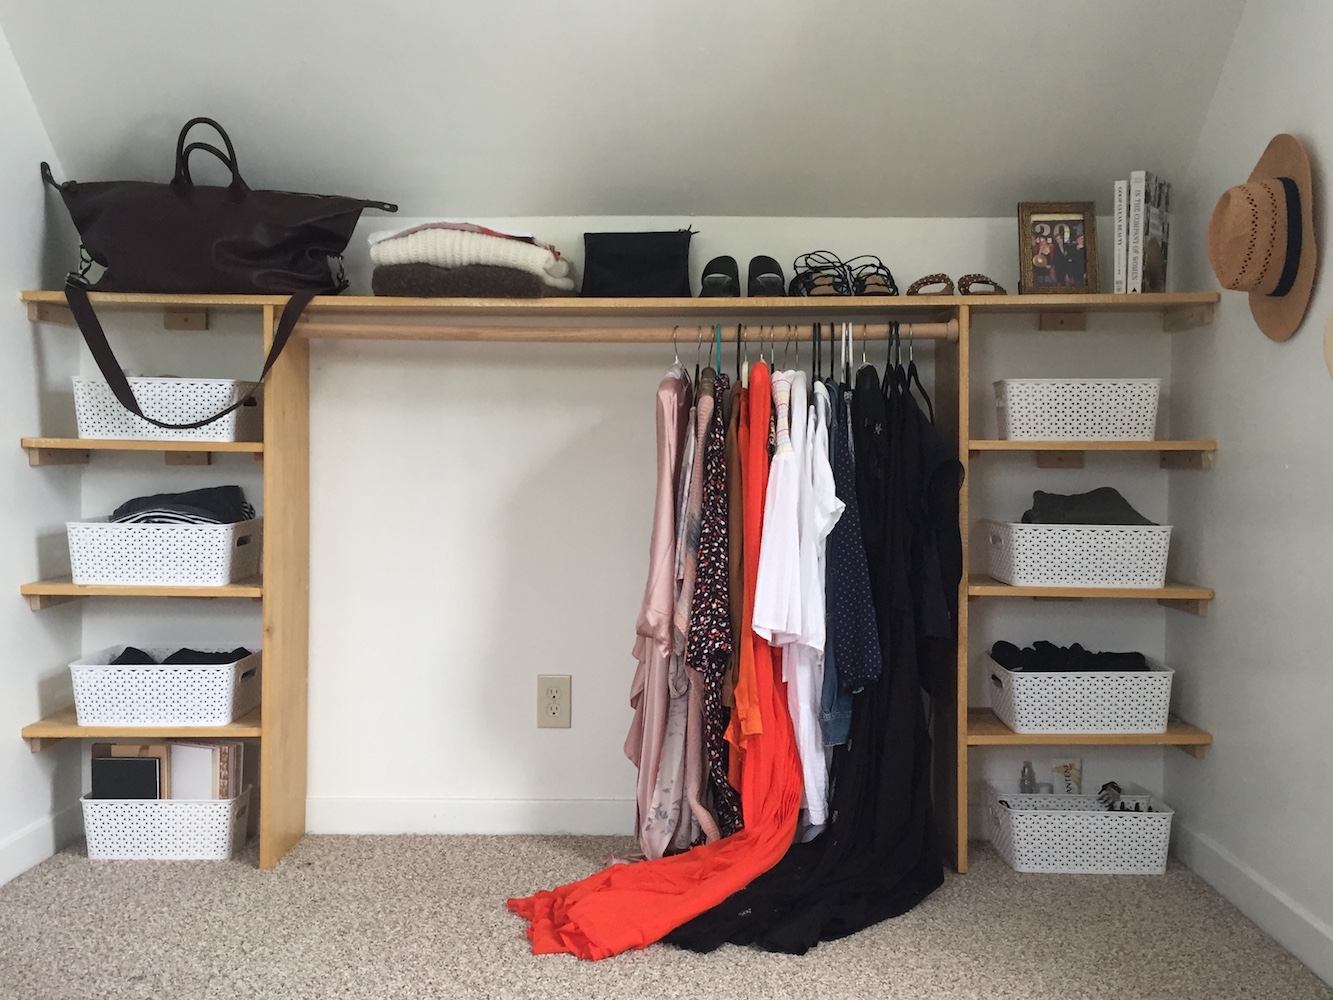 DIY Dressing Room: Photo of entire closet with shelving, clothes, bins, purses, shoes, and hat